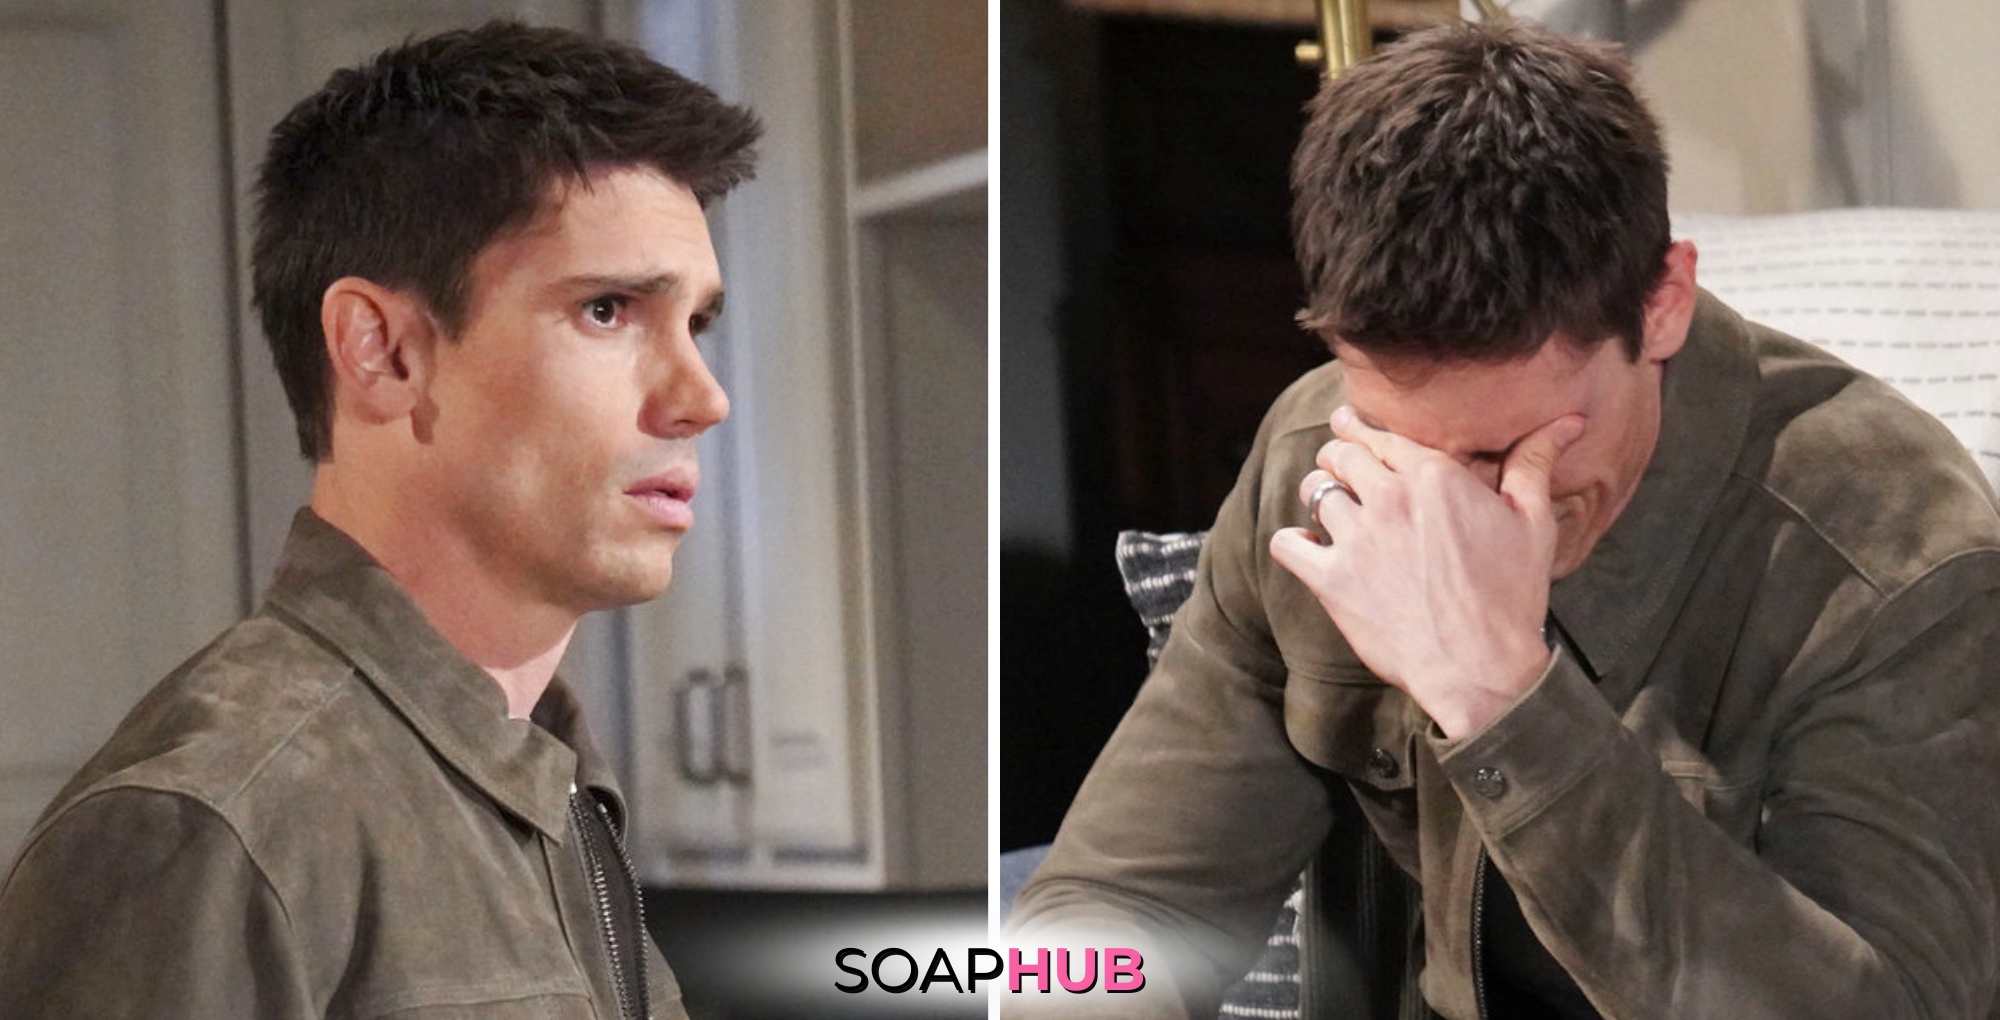 Bold and the Beautiful Spoilers for Thursday April 4 Episode 9243 Feature Finn with the Soap Hub Logo Across the Bottom